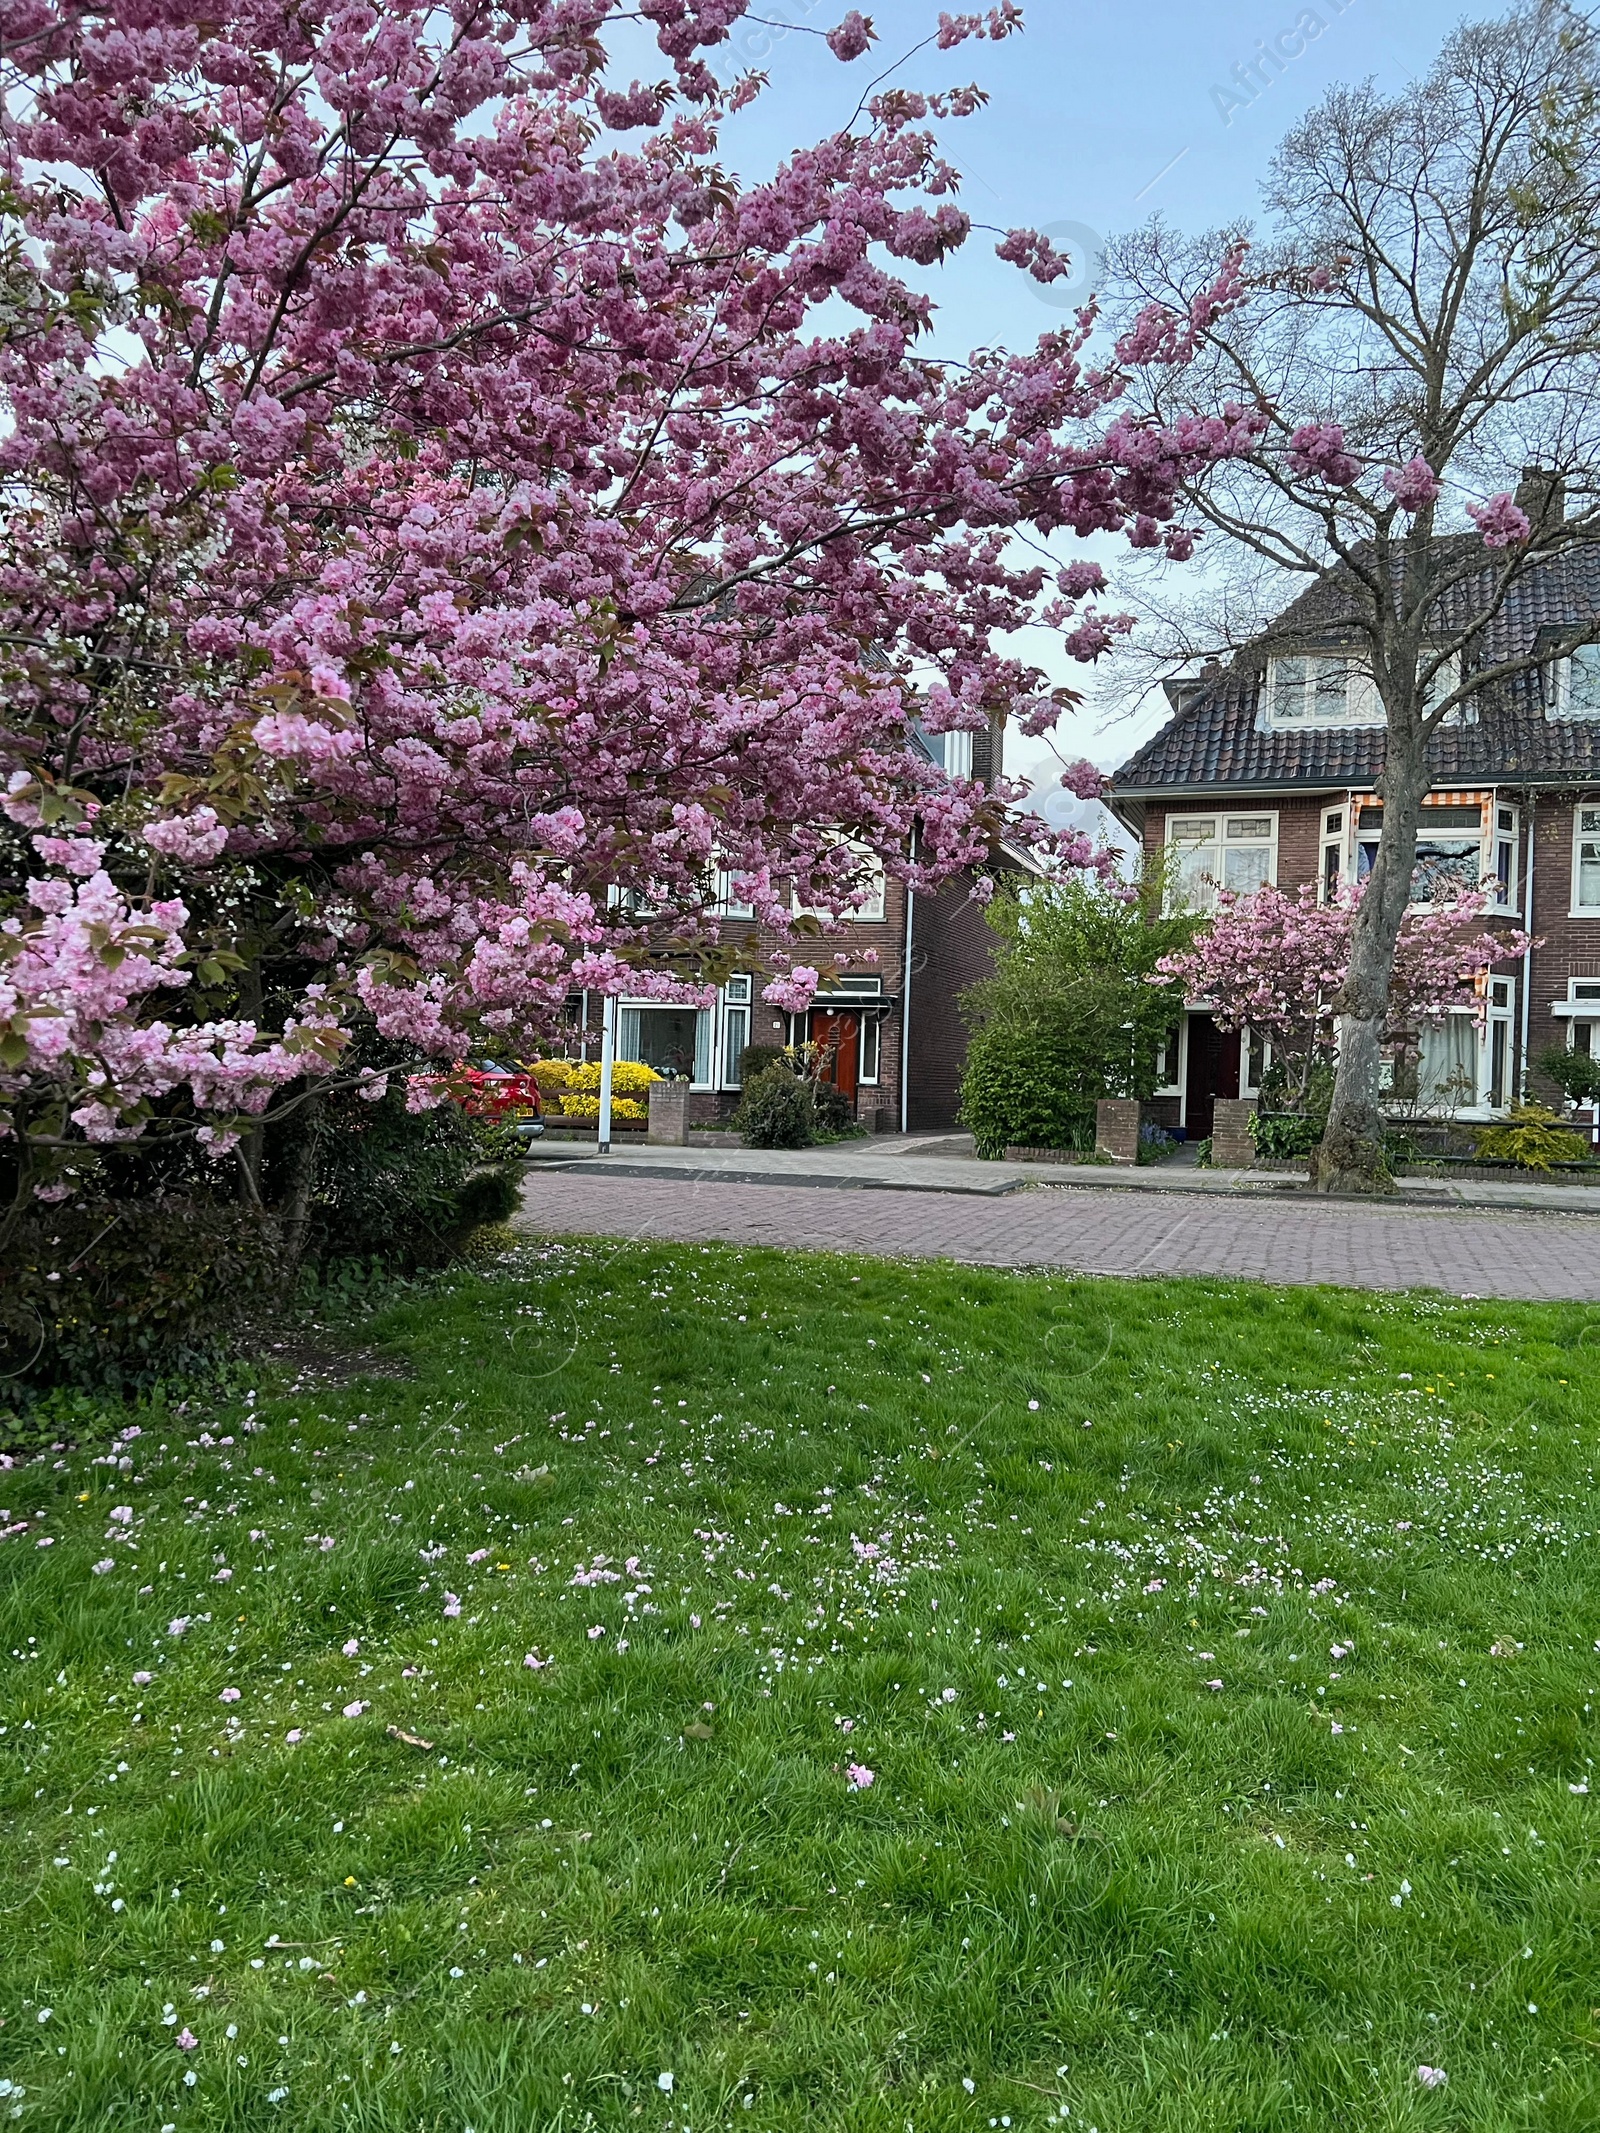 Photo of Blooming trees and private buildings on spring day